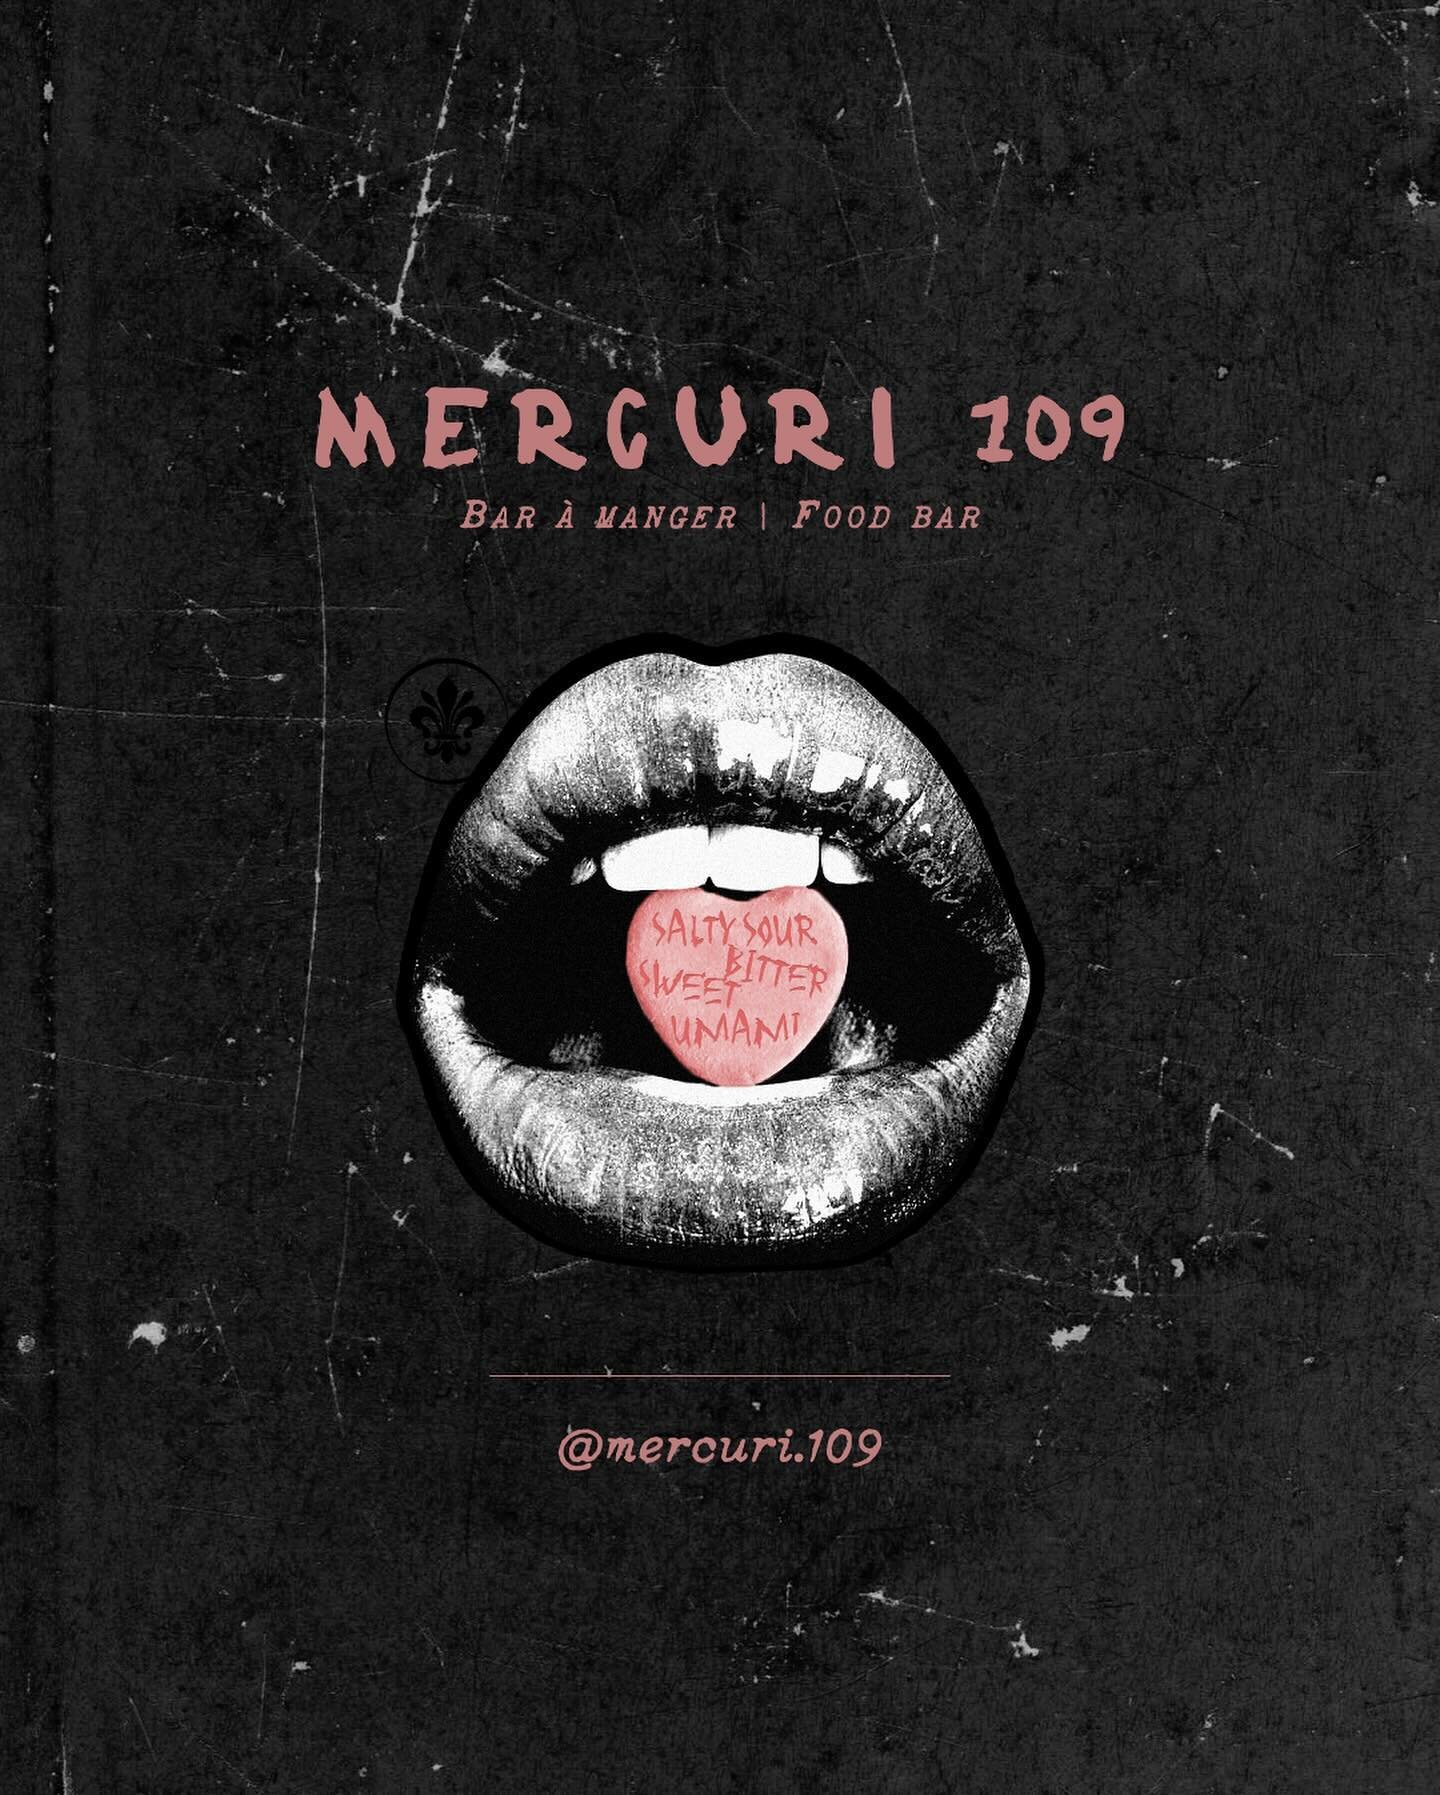 Branding &amp; website development for @mercuri.109 and renowned chef @chefjoemercuri ✨🖤 

At MERCURI 109, each dish is a masterpiece, a symphony of flavors carefully orchestrated to awaken the senses. Salty, sour, bitter, sweet, umami🤤

Embodying 